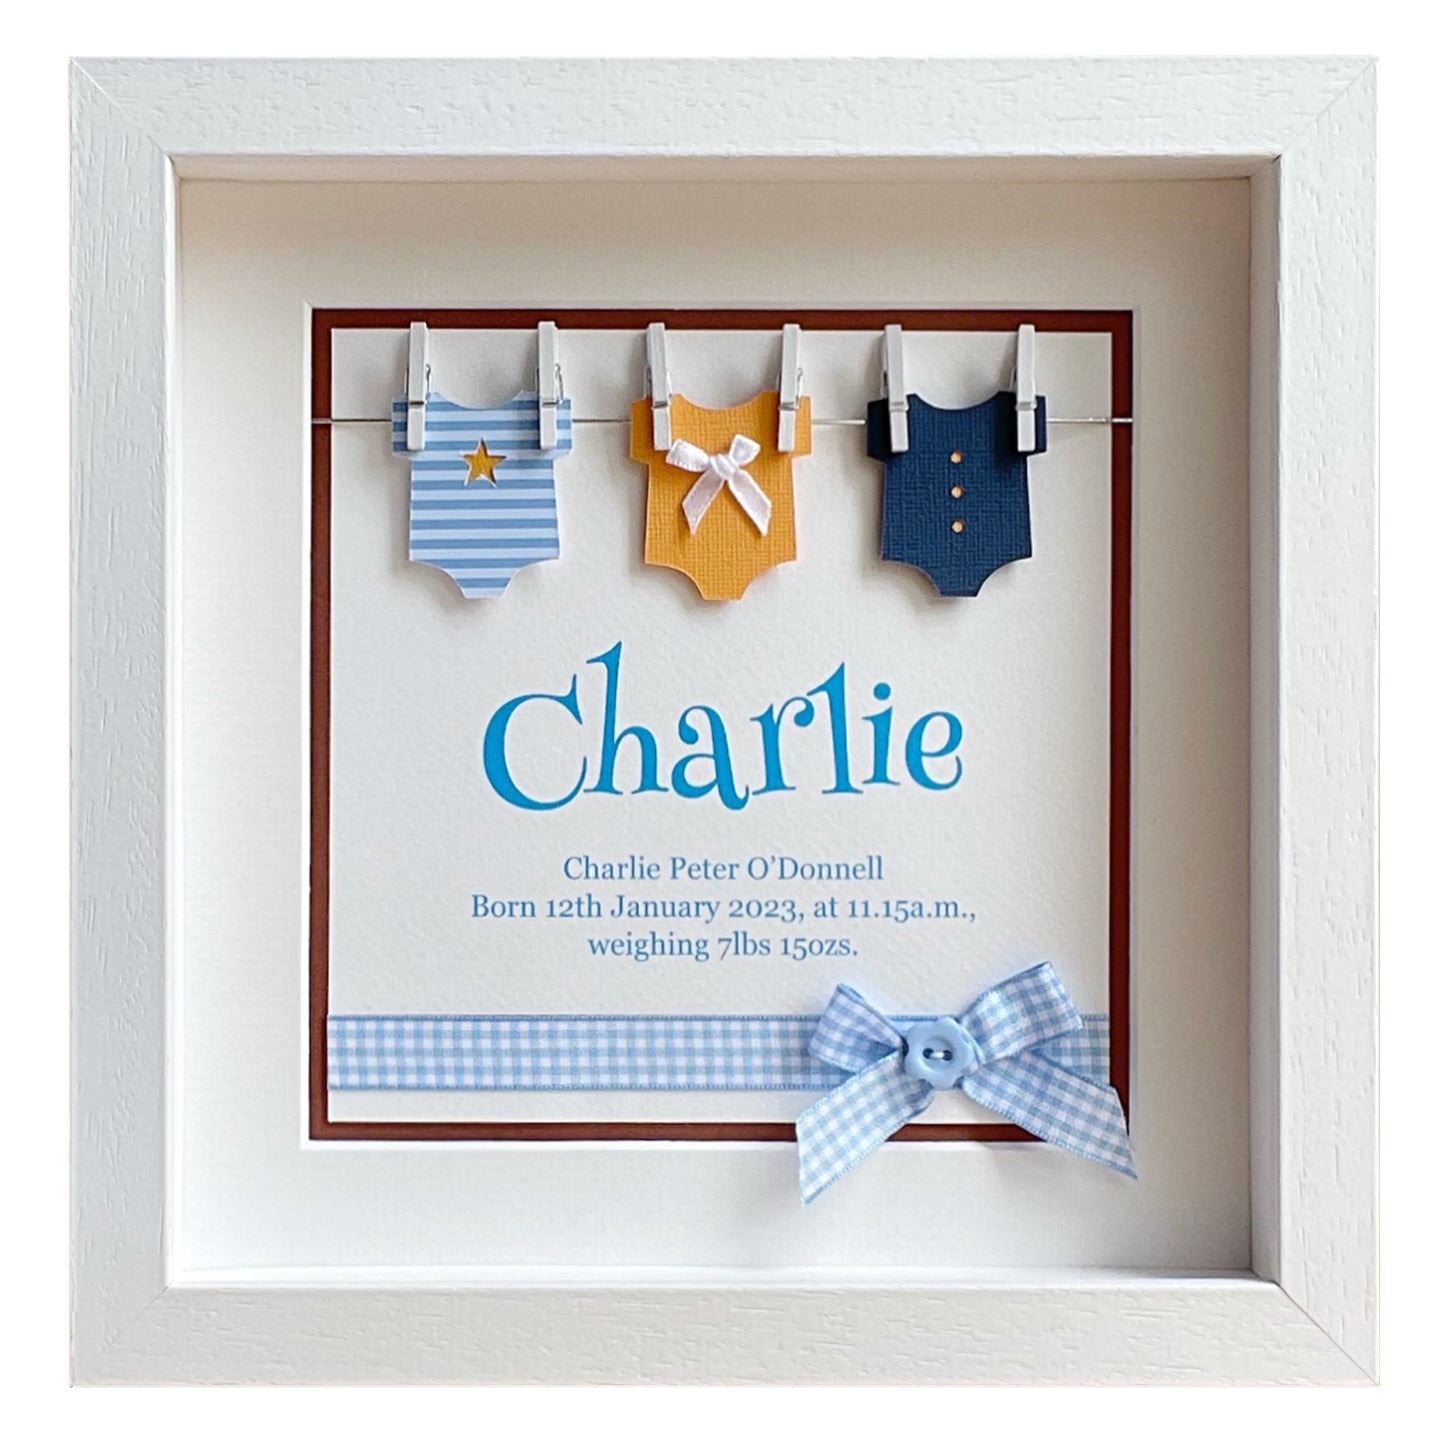 Baby boy’s vests handmade gift frame (Personalised & Made to order)